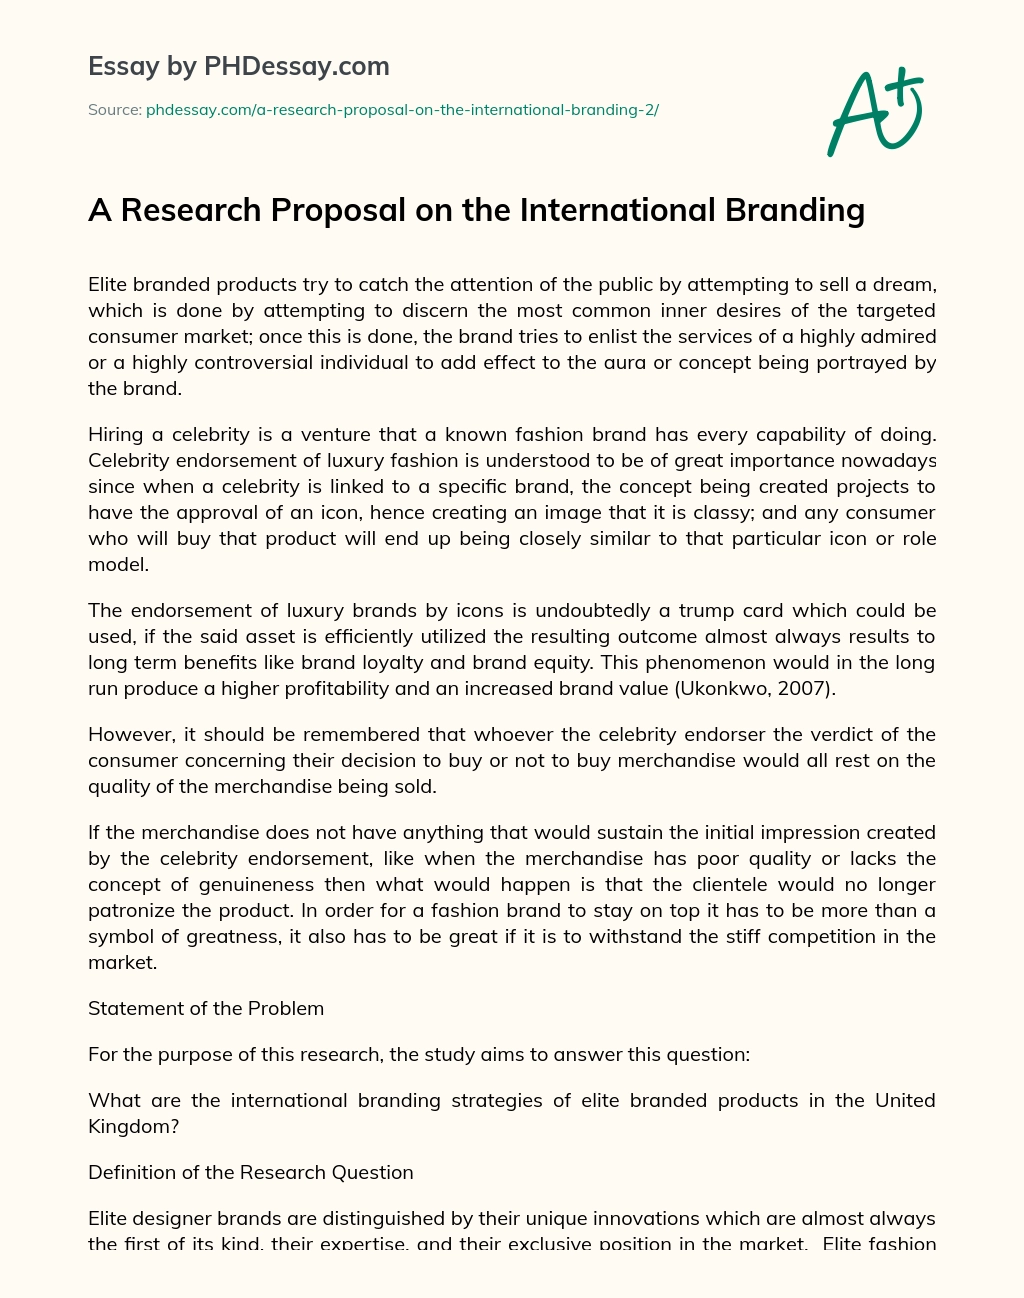 A Research Proposal on the International Branding essay